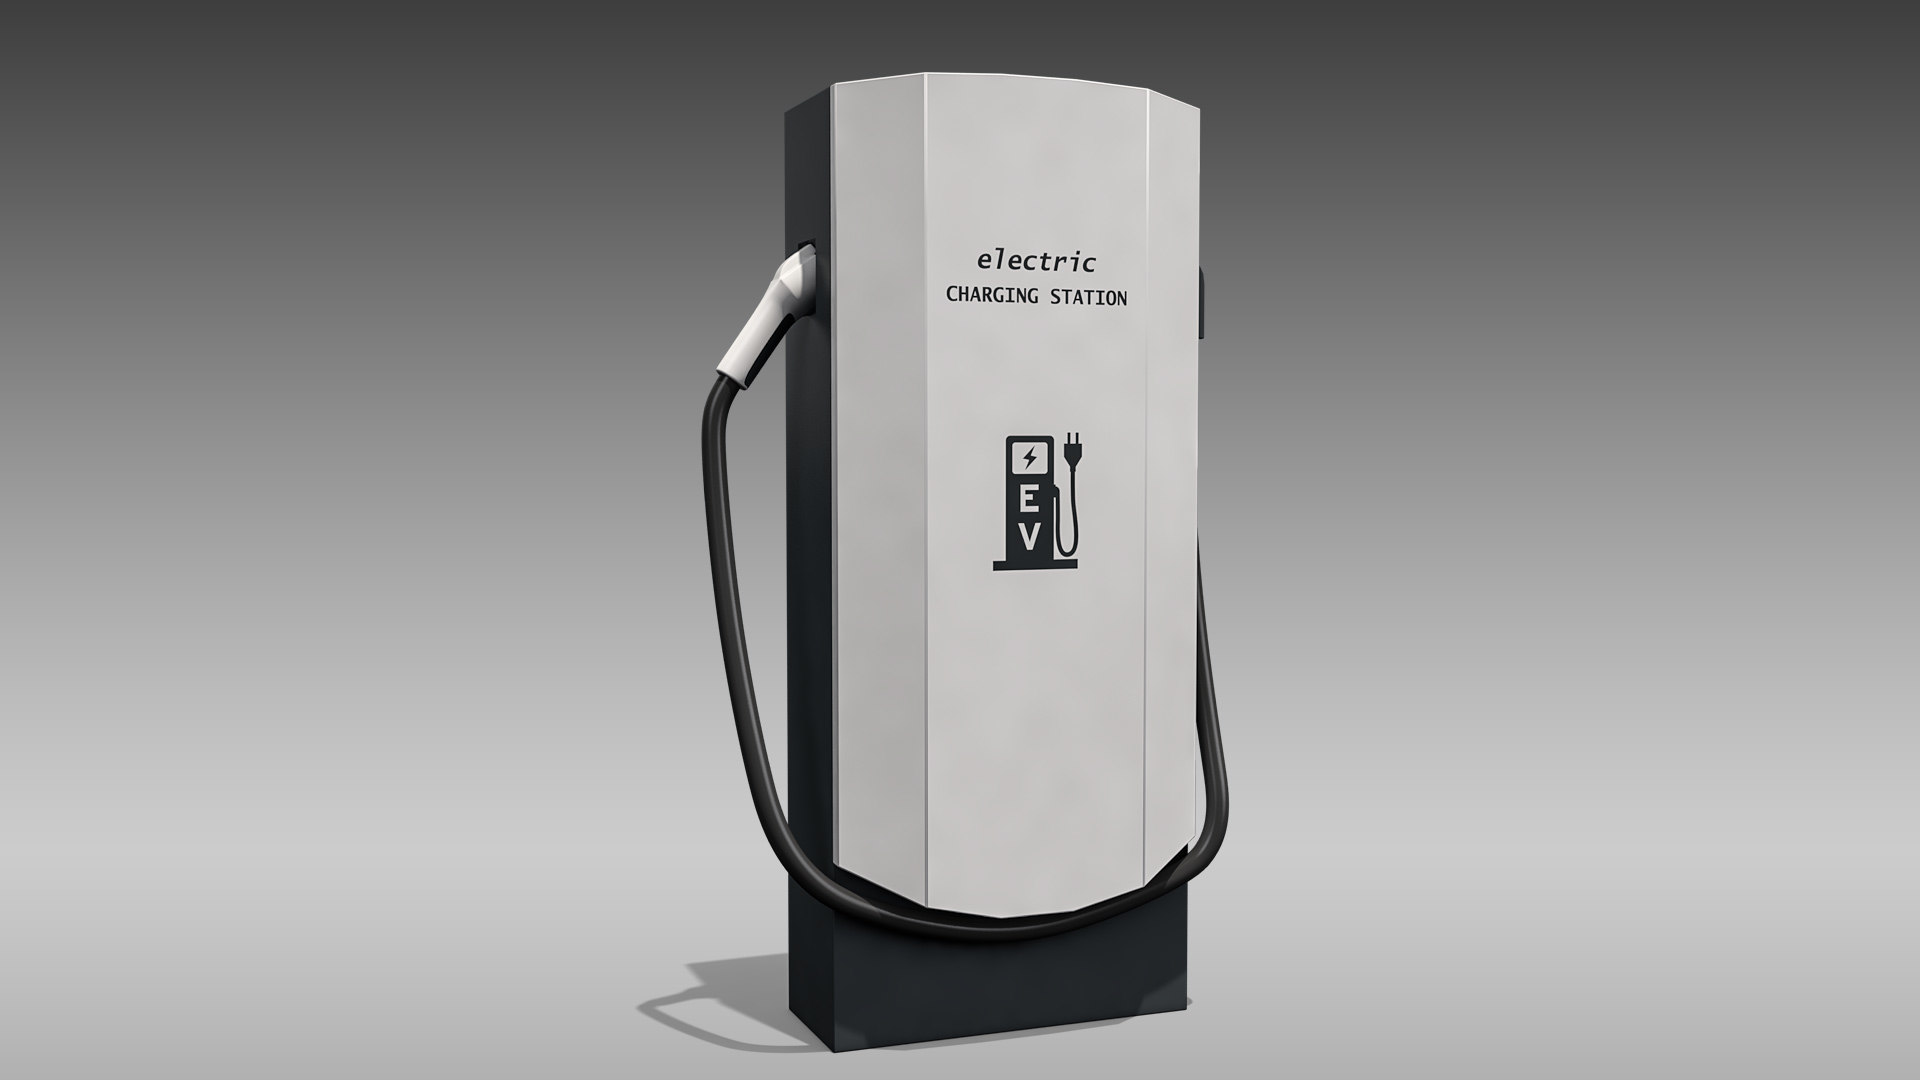 Electric vehicle charger 3D model TurboSquid 1586927